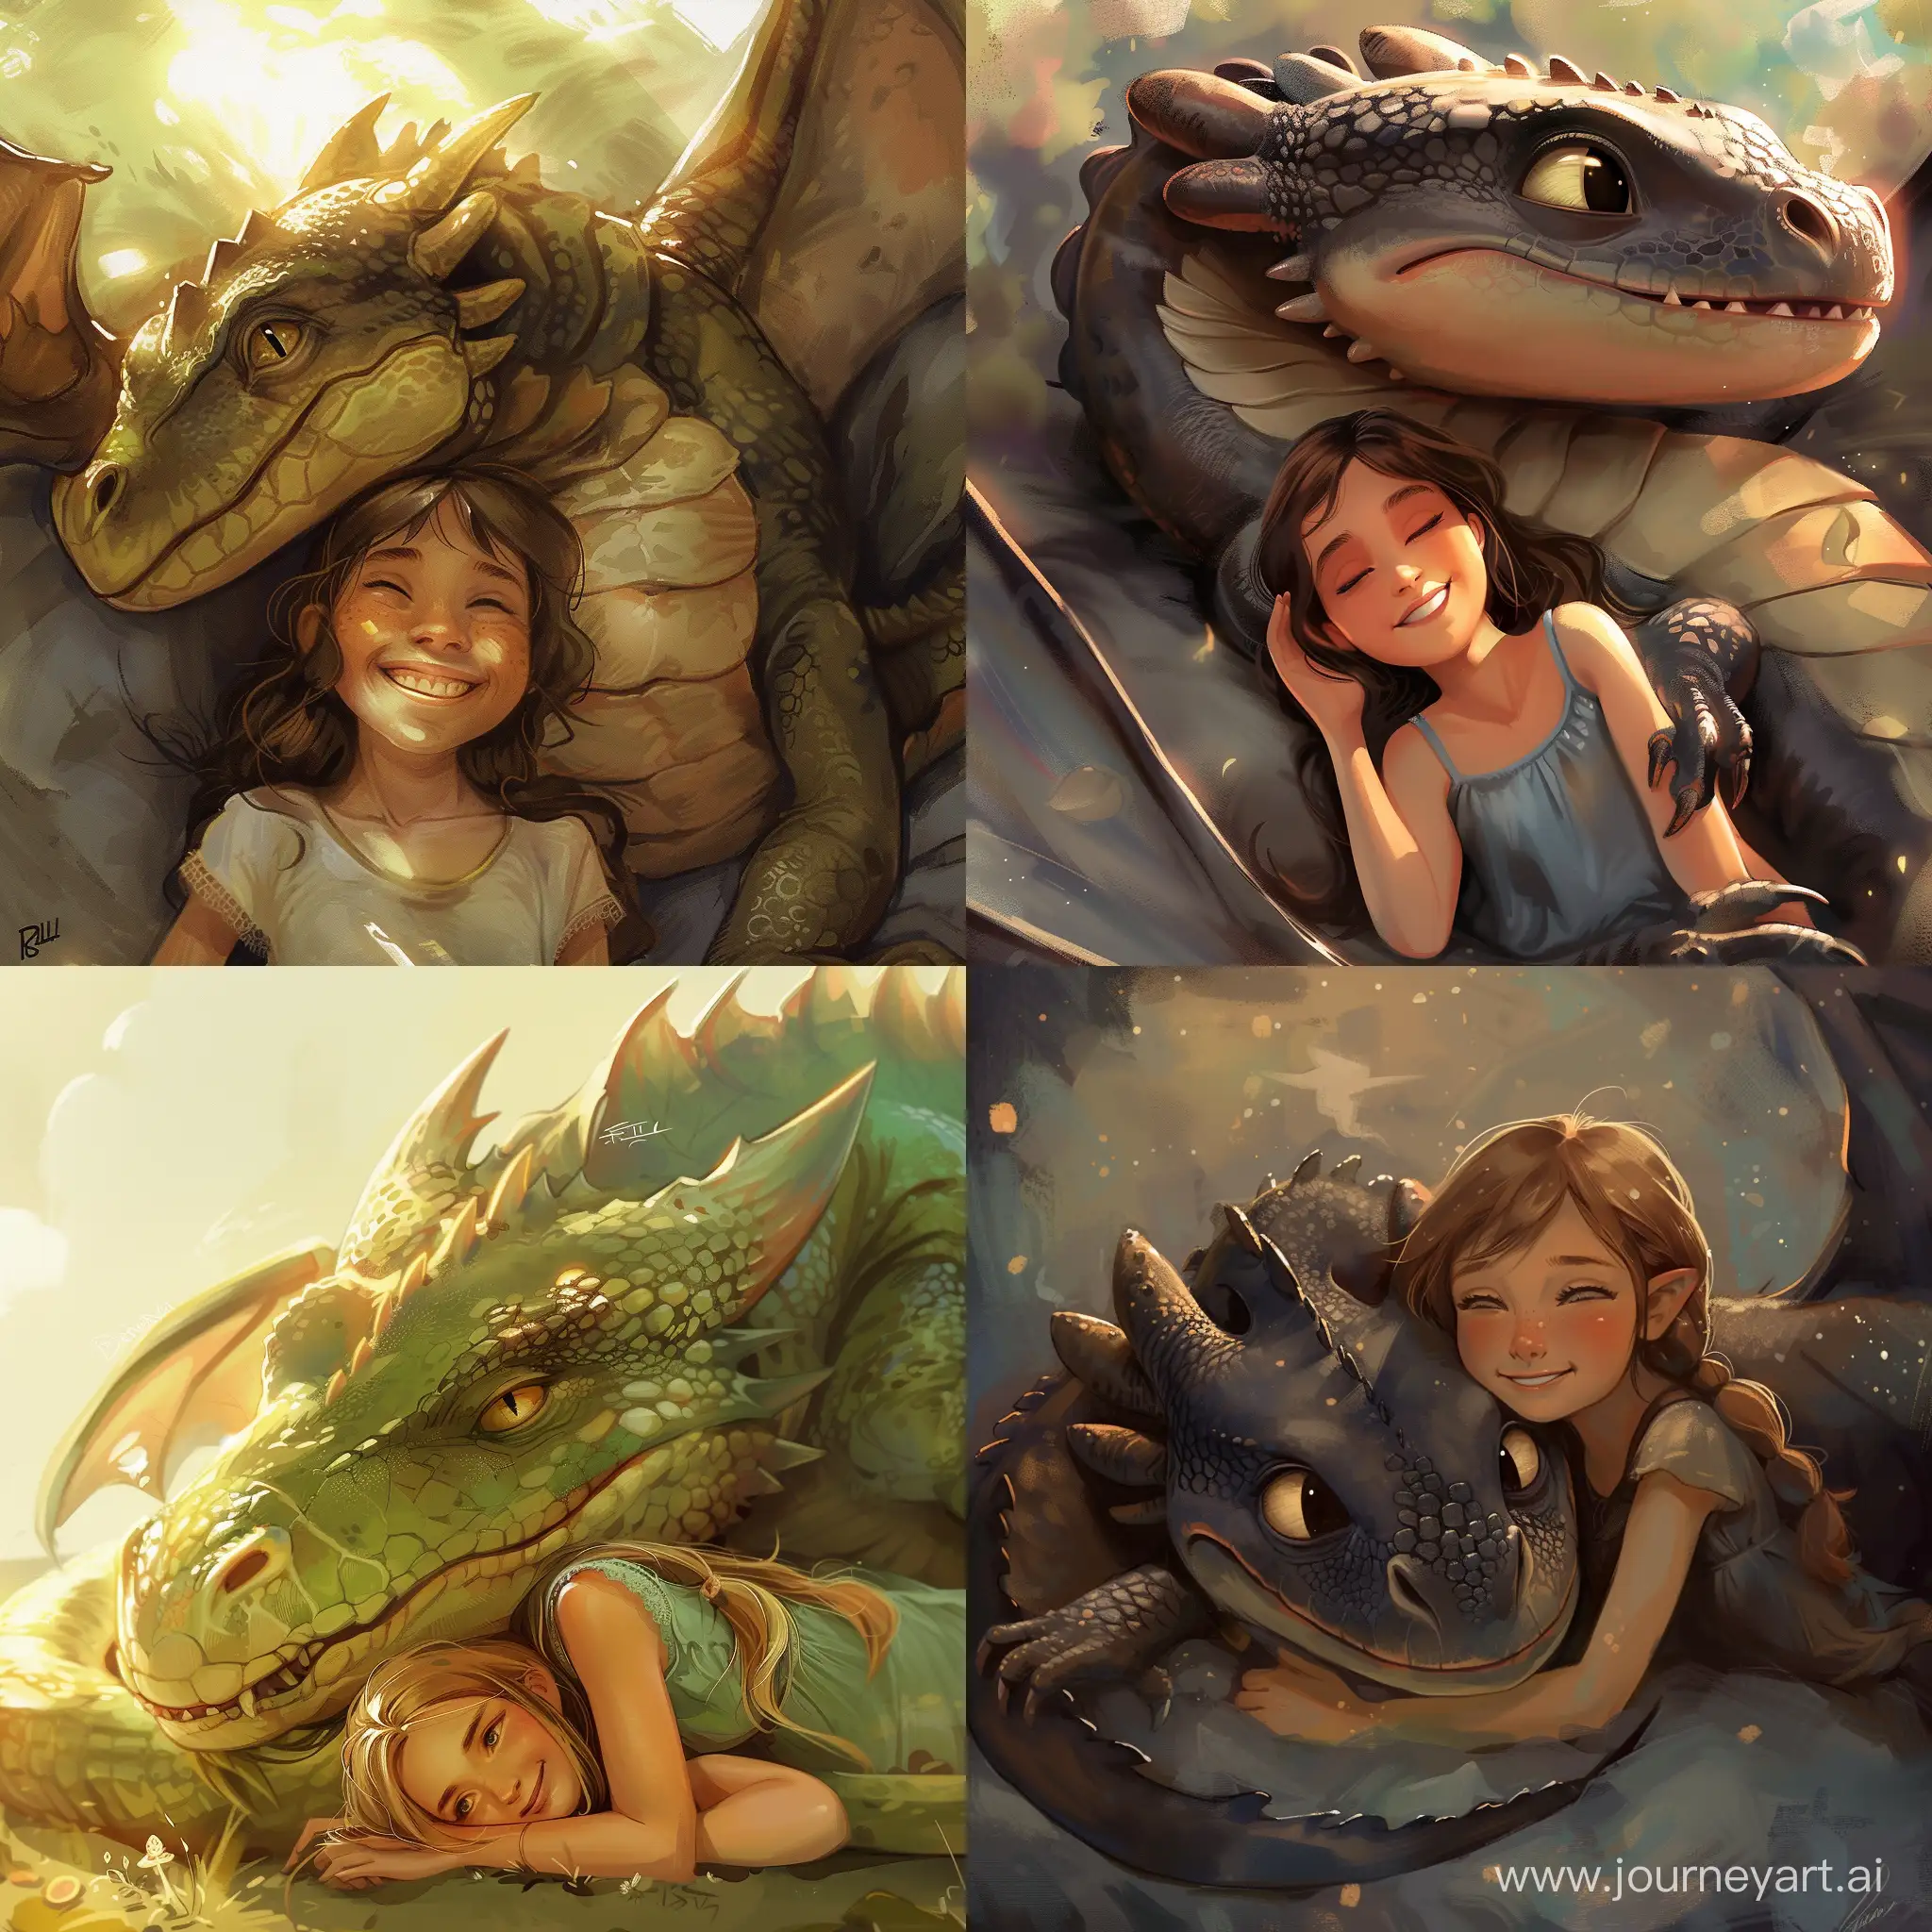 Smiling-Girl-Relaxing-with-a-Friendly-Dragon